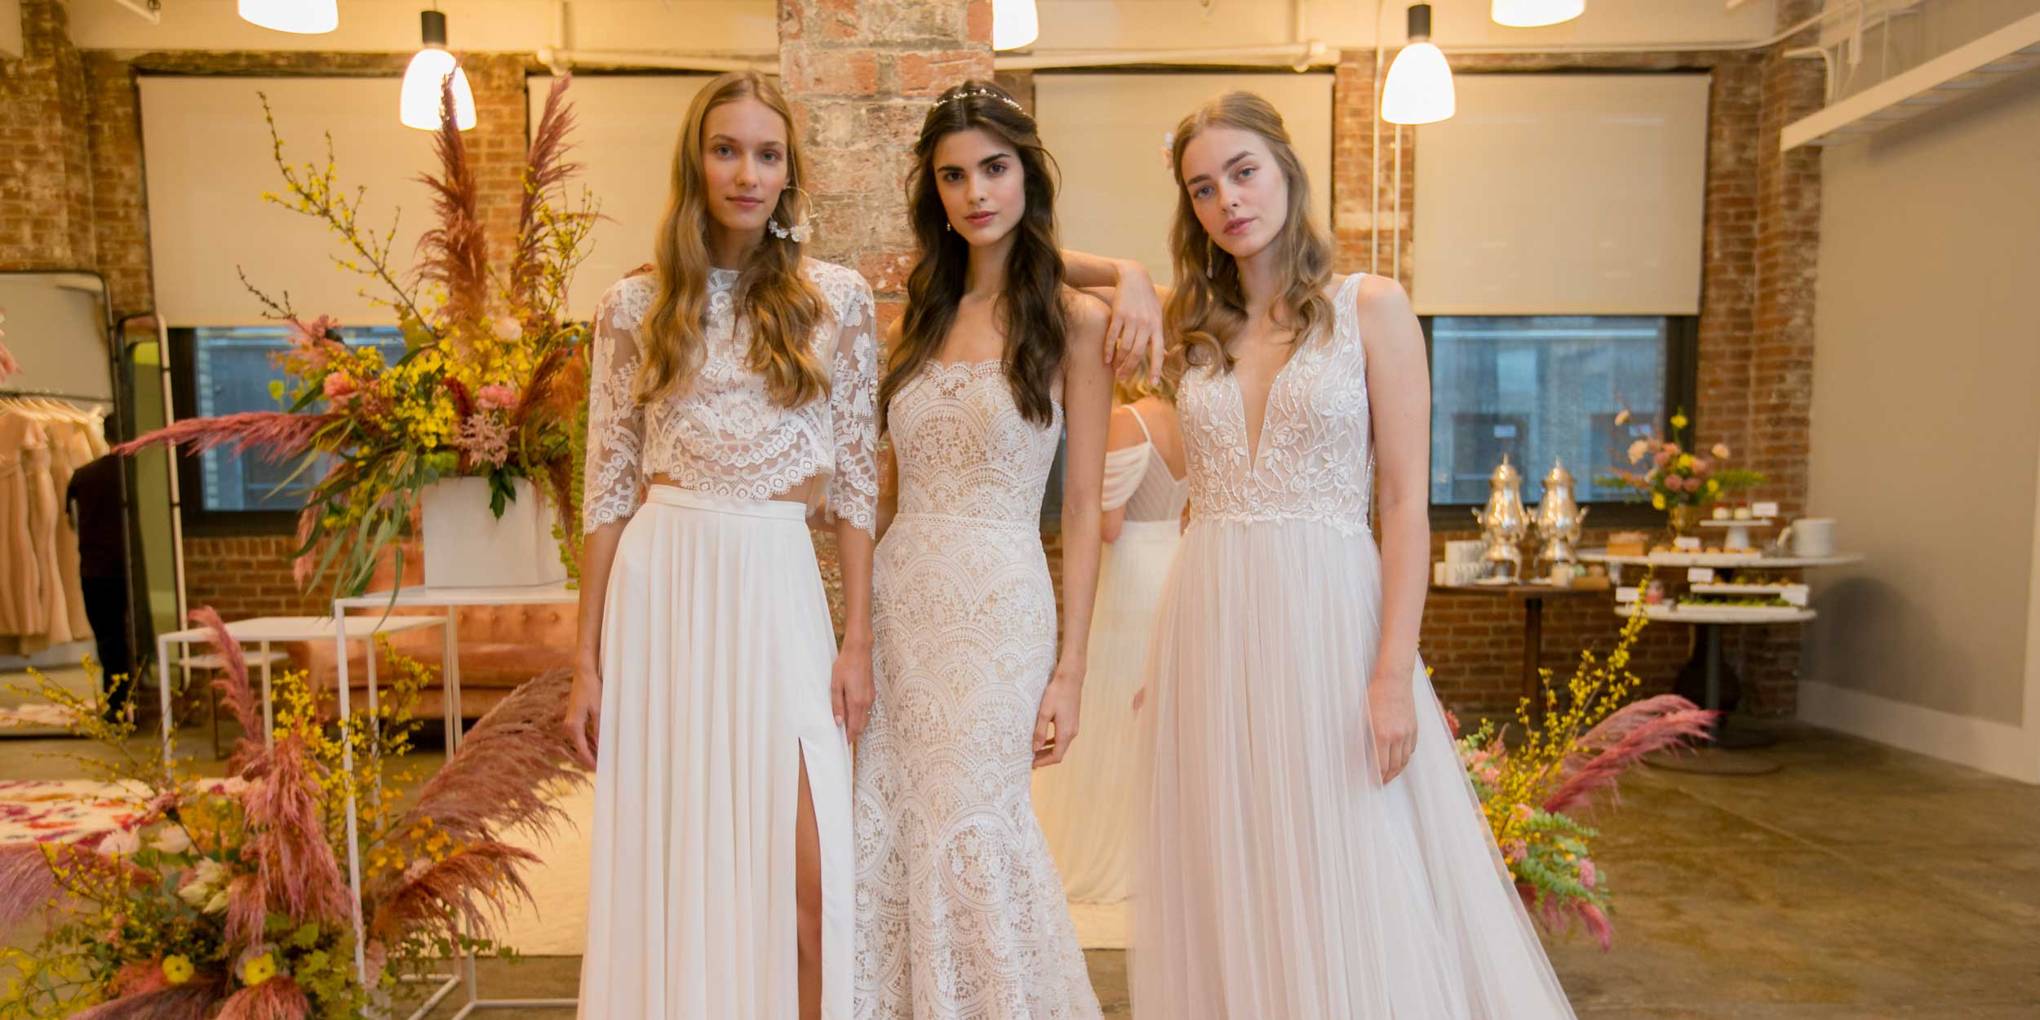 2019 Wedding Dress Trends To Know About Image